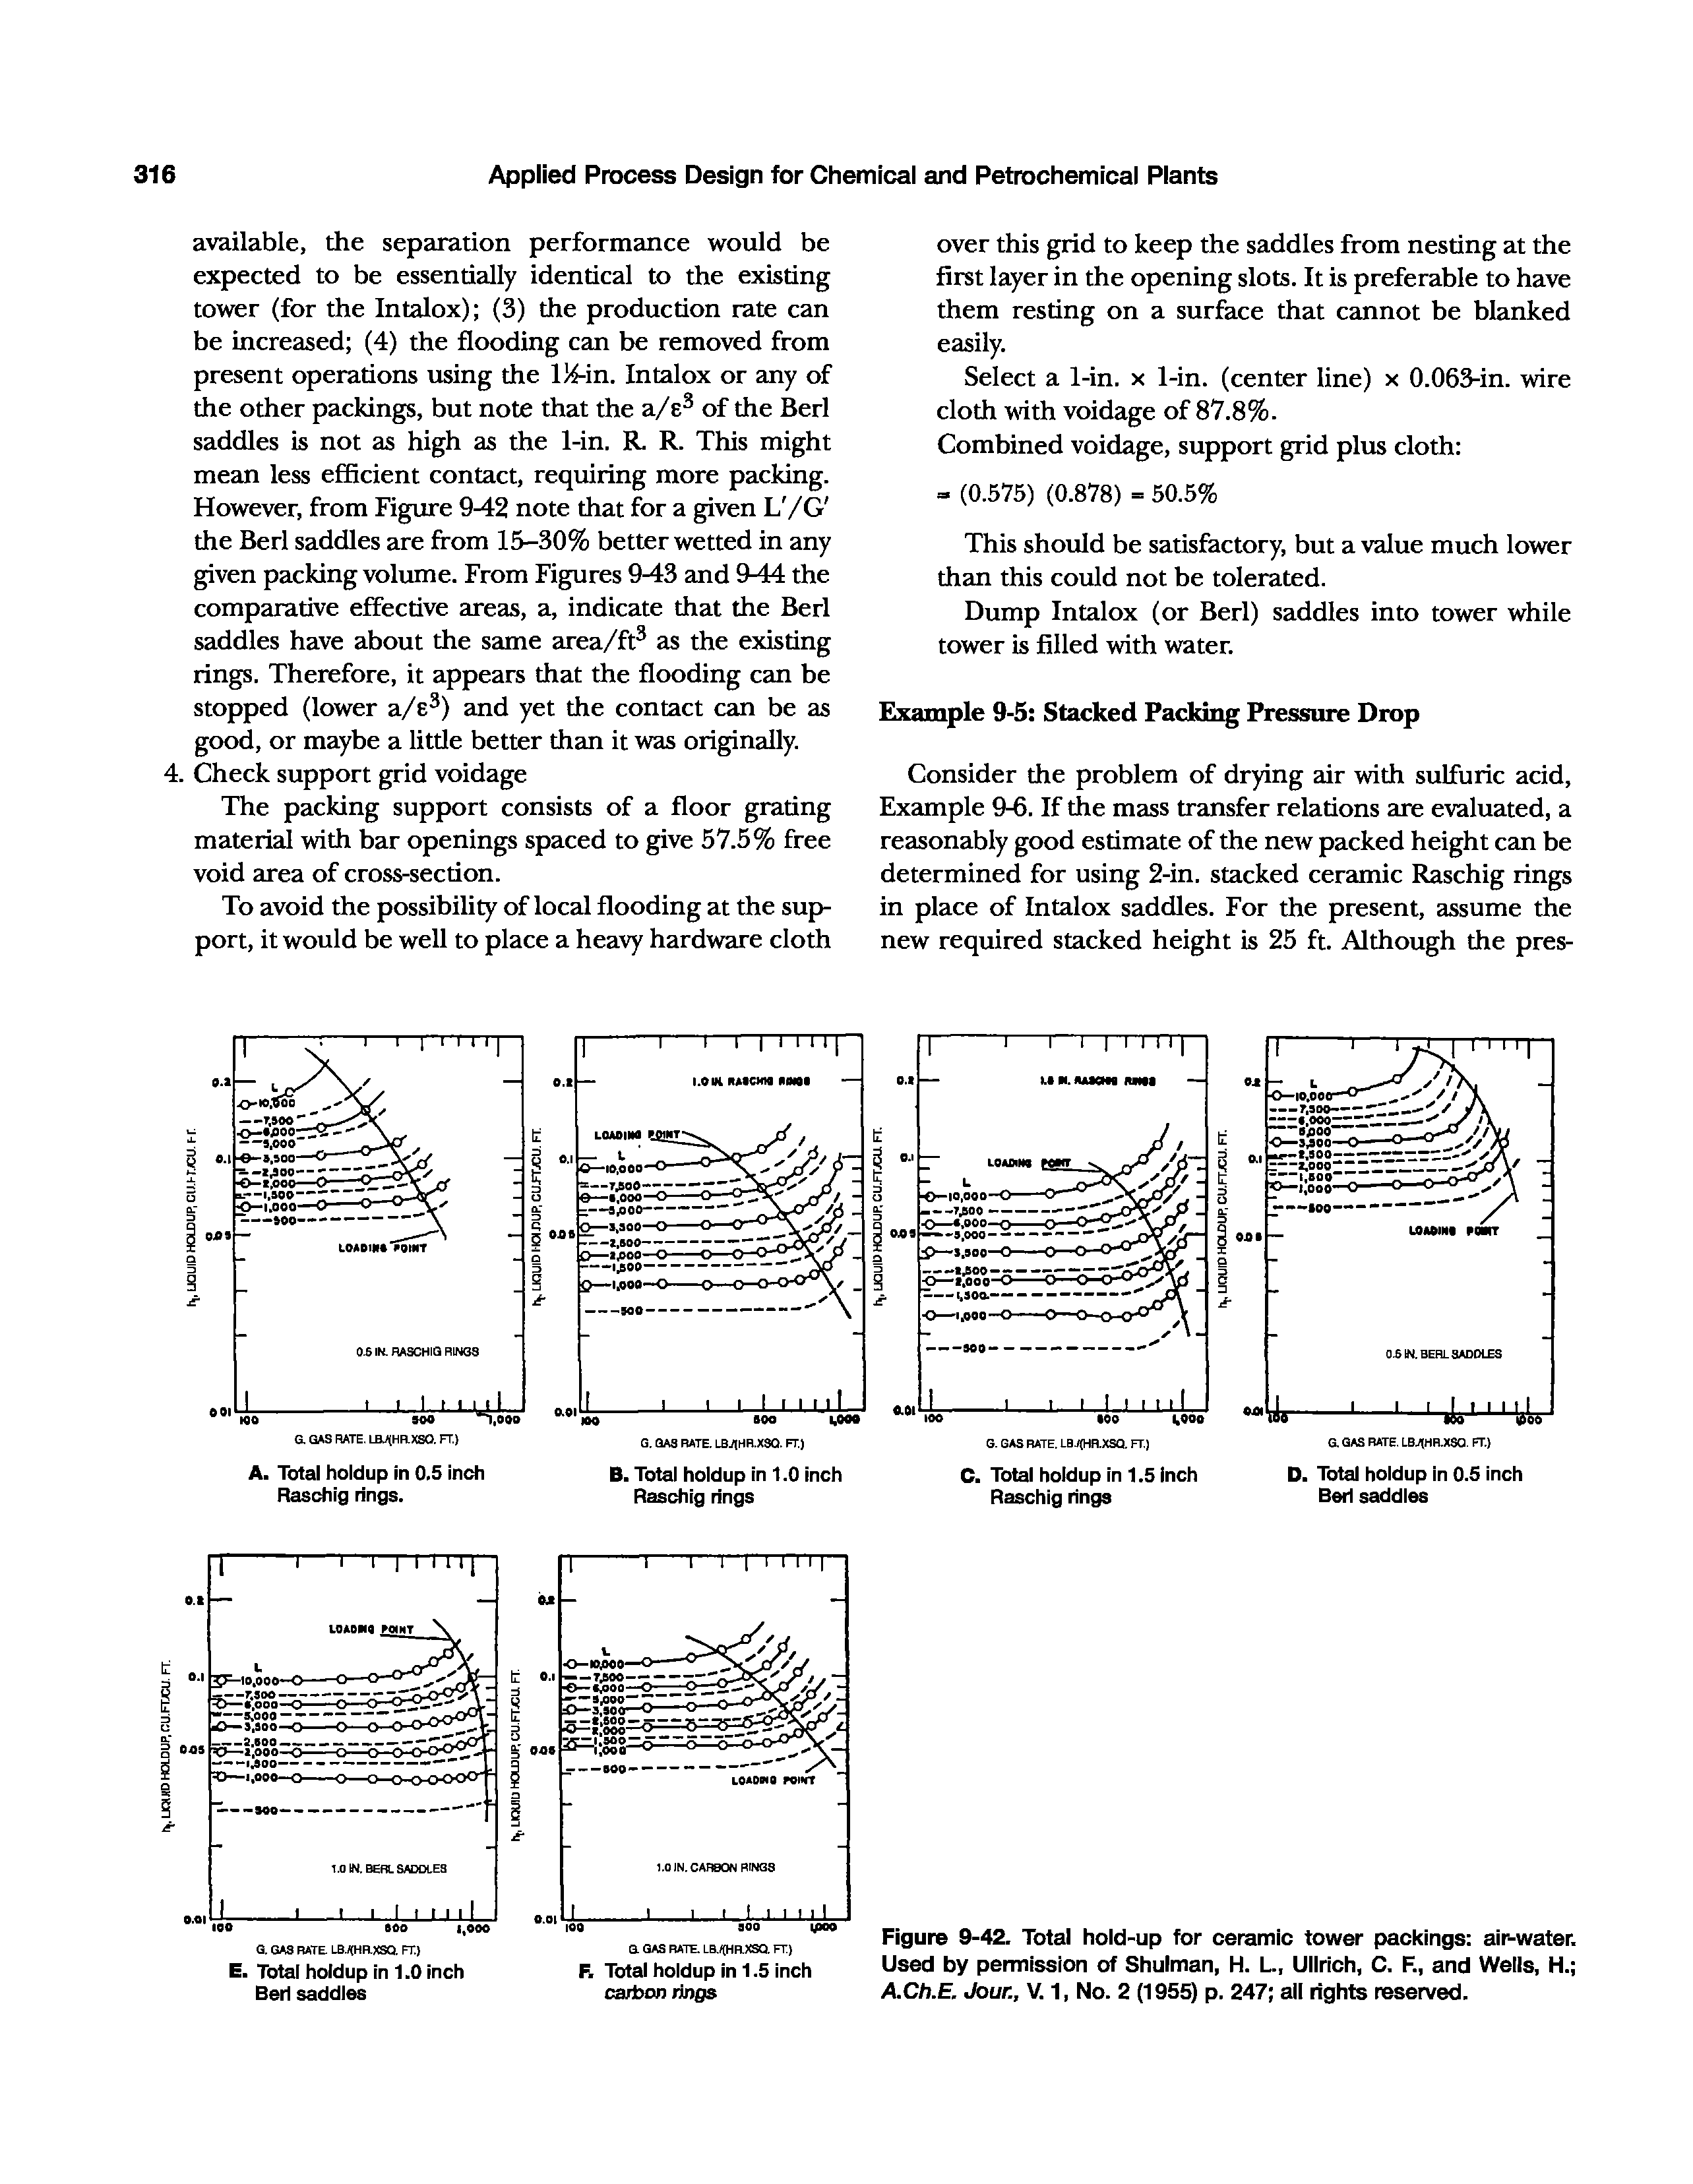 Figure 9-42. Total hold-up for ceramic tower packings air-water. Used by permission of Shulman, H. L, Ullrich, C. F., and Weils, H. ACh.E. Jour., V. 1, No. 2 (1955) p. 247 all rights reserved.